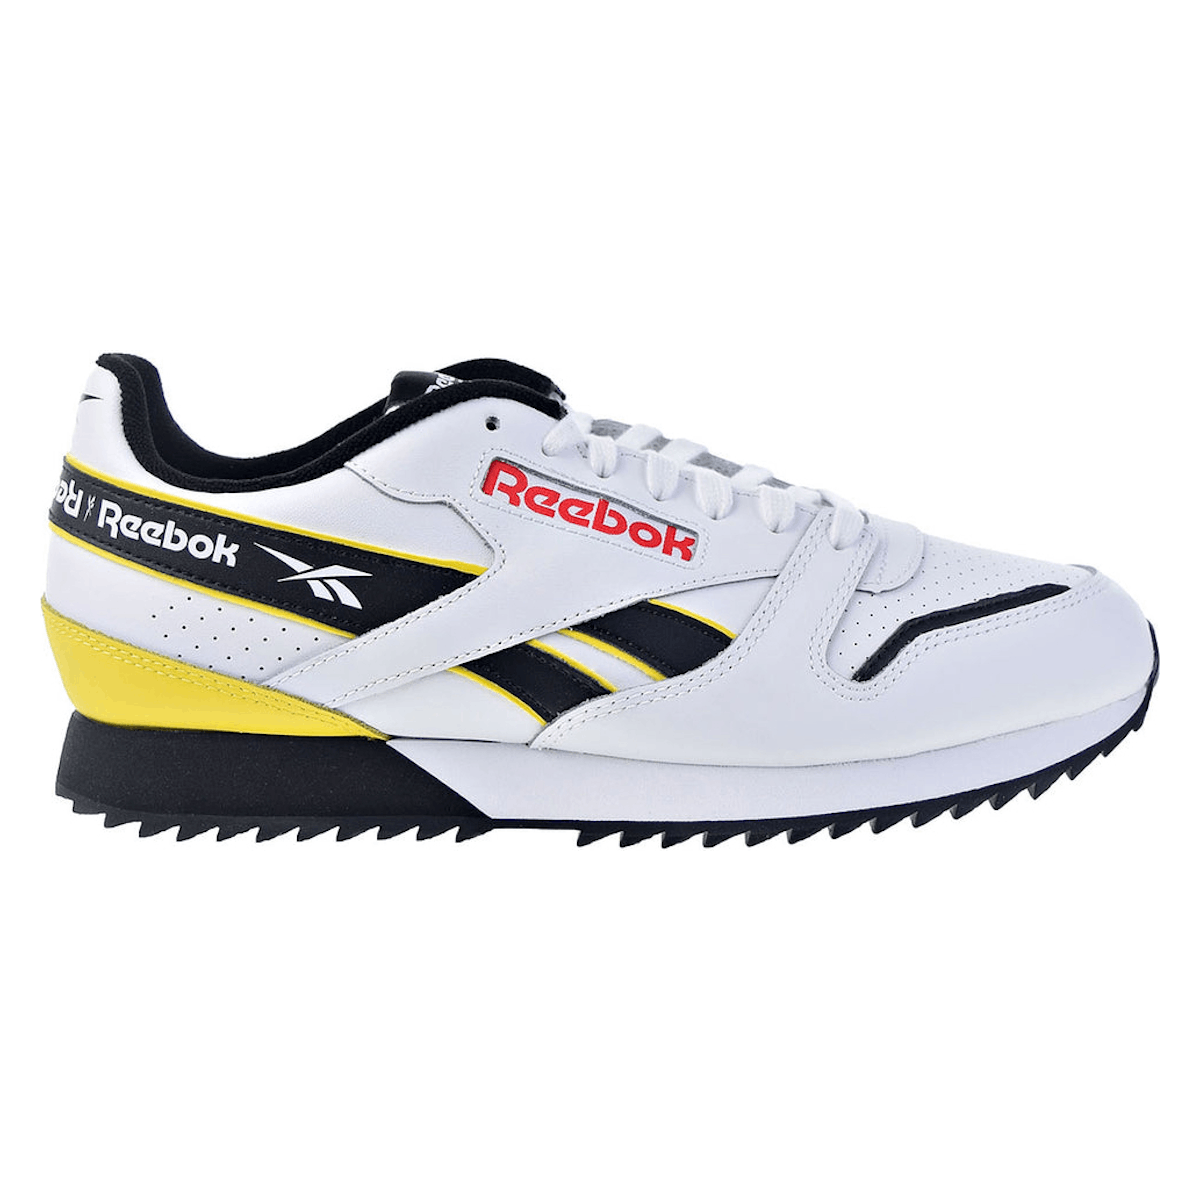 Reebok Classic Leather RippIe White Primal Red Yellow